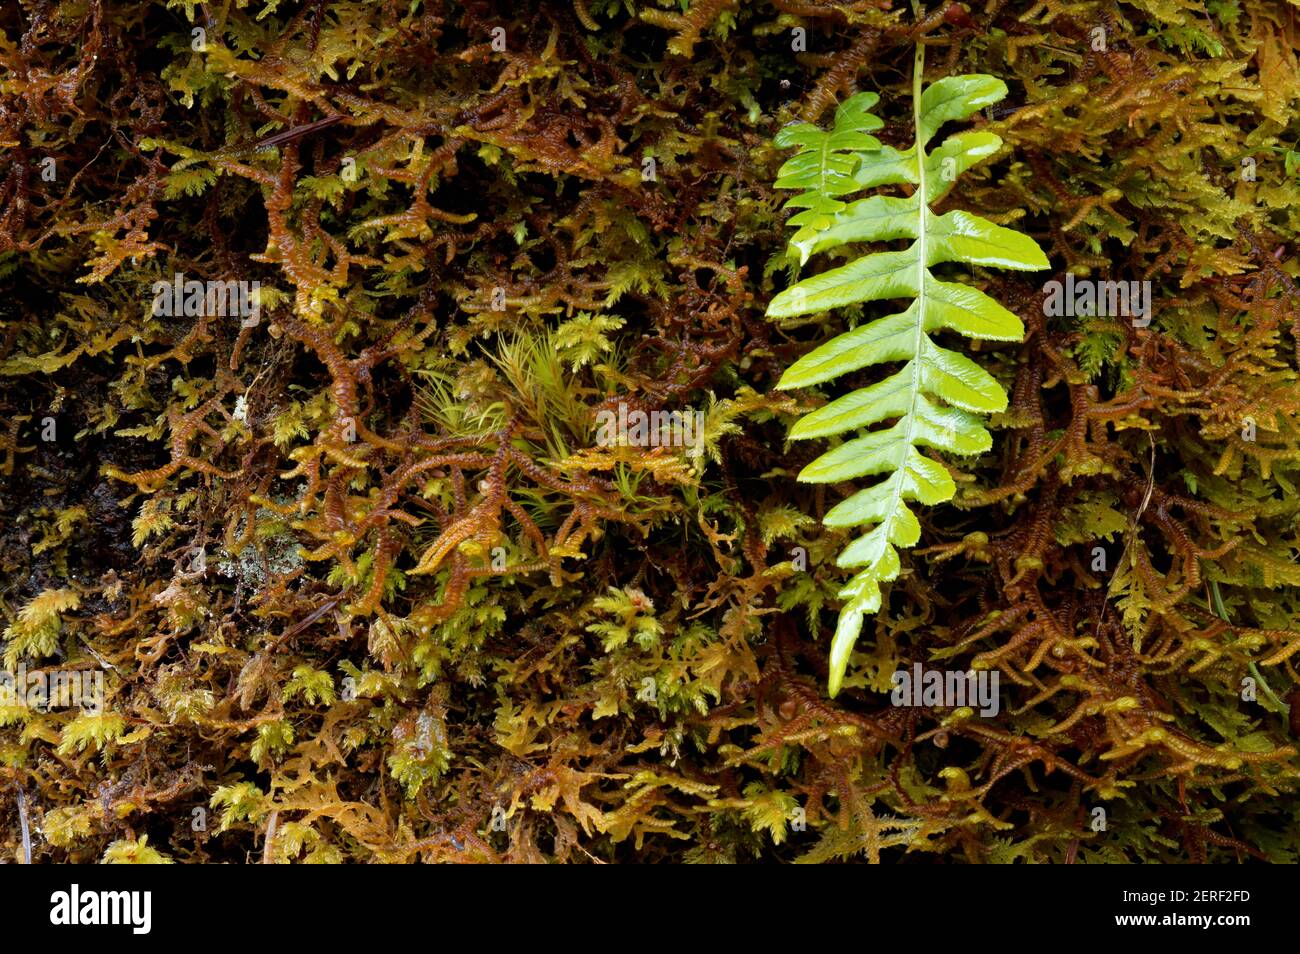 Licorice fern growing from moss on bigleaf maple tree, Graves Creek Campground, Quinault Rainforest, Olympic National Park, Jefferson County, Washingt Stock Photo